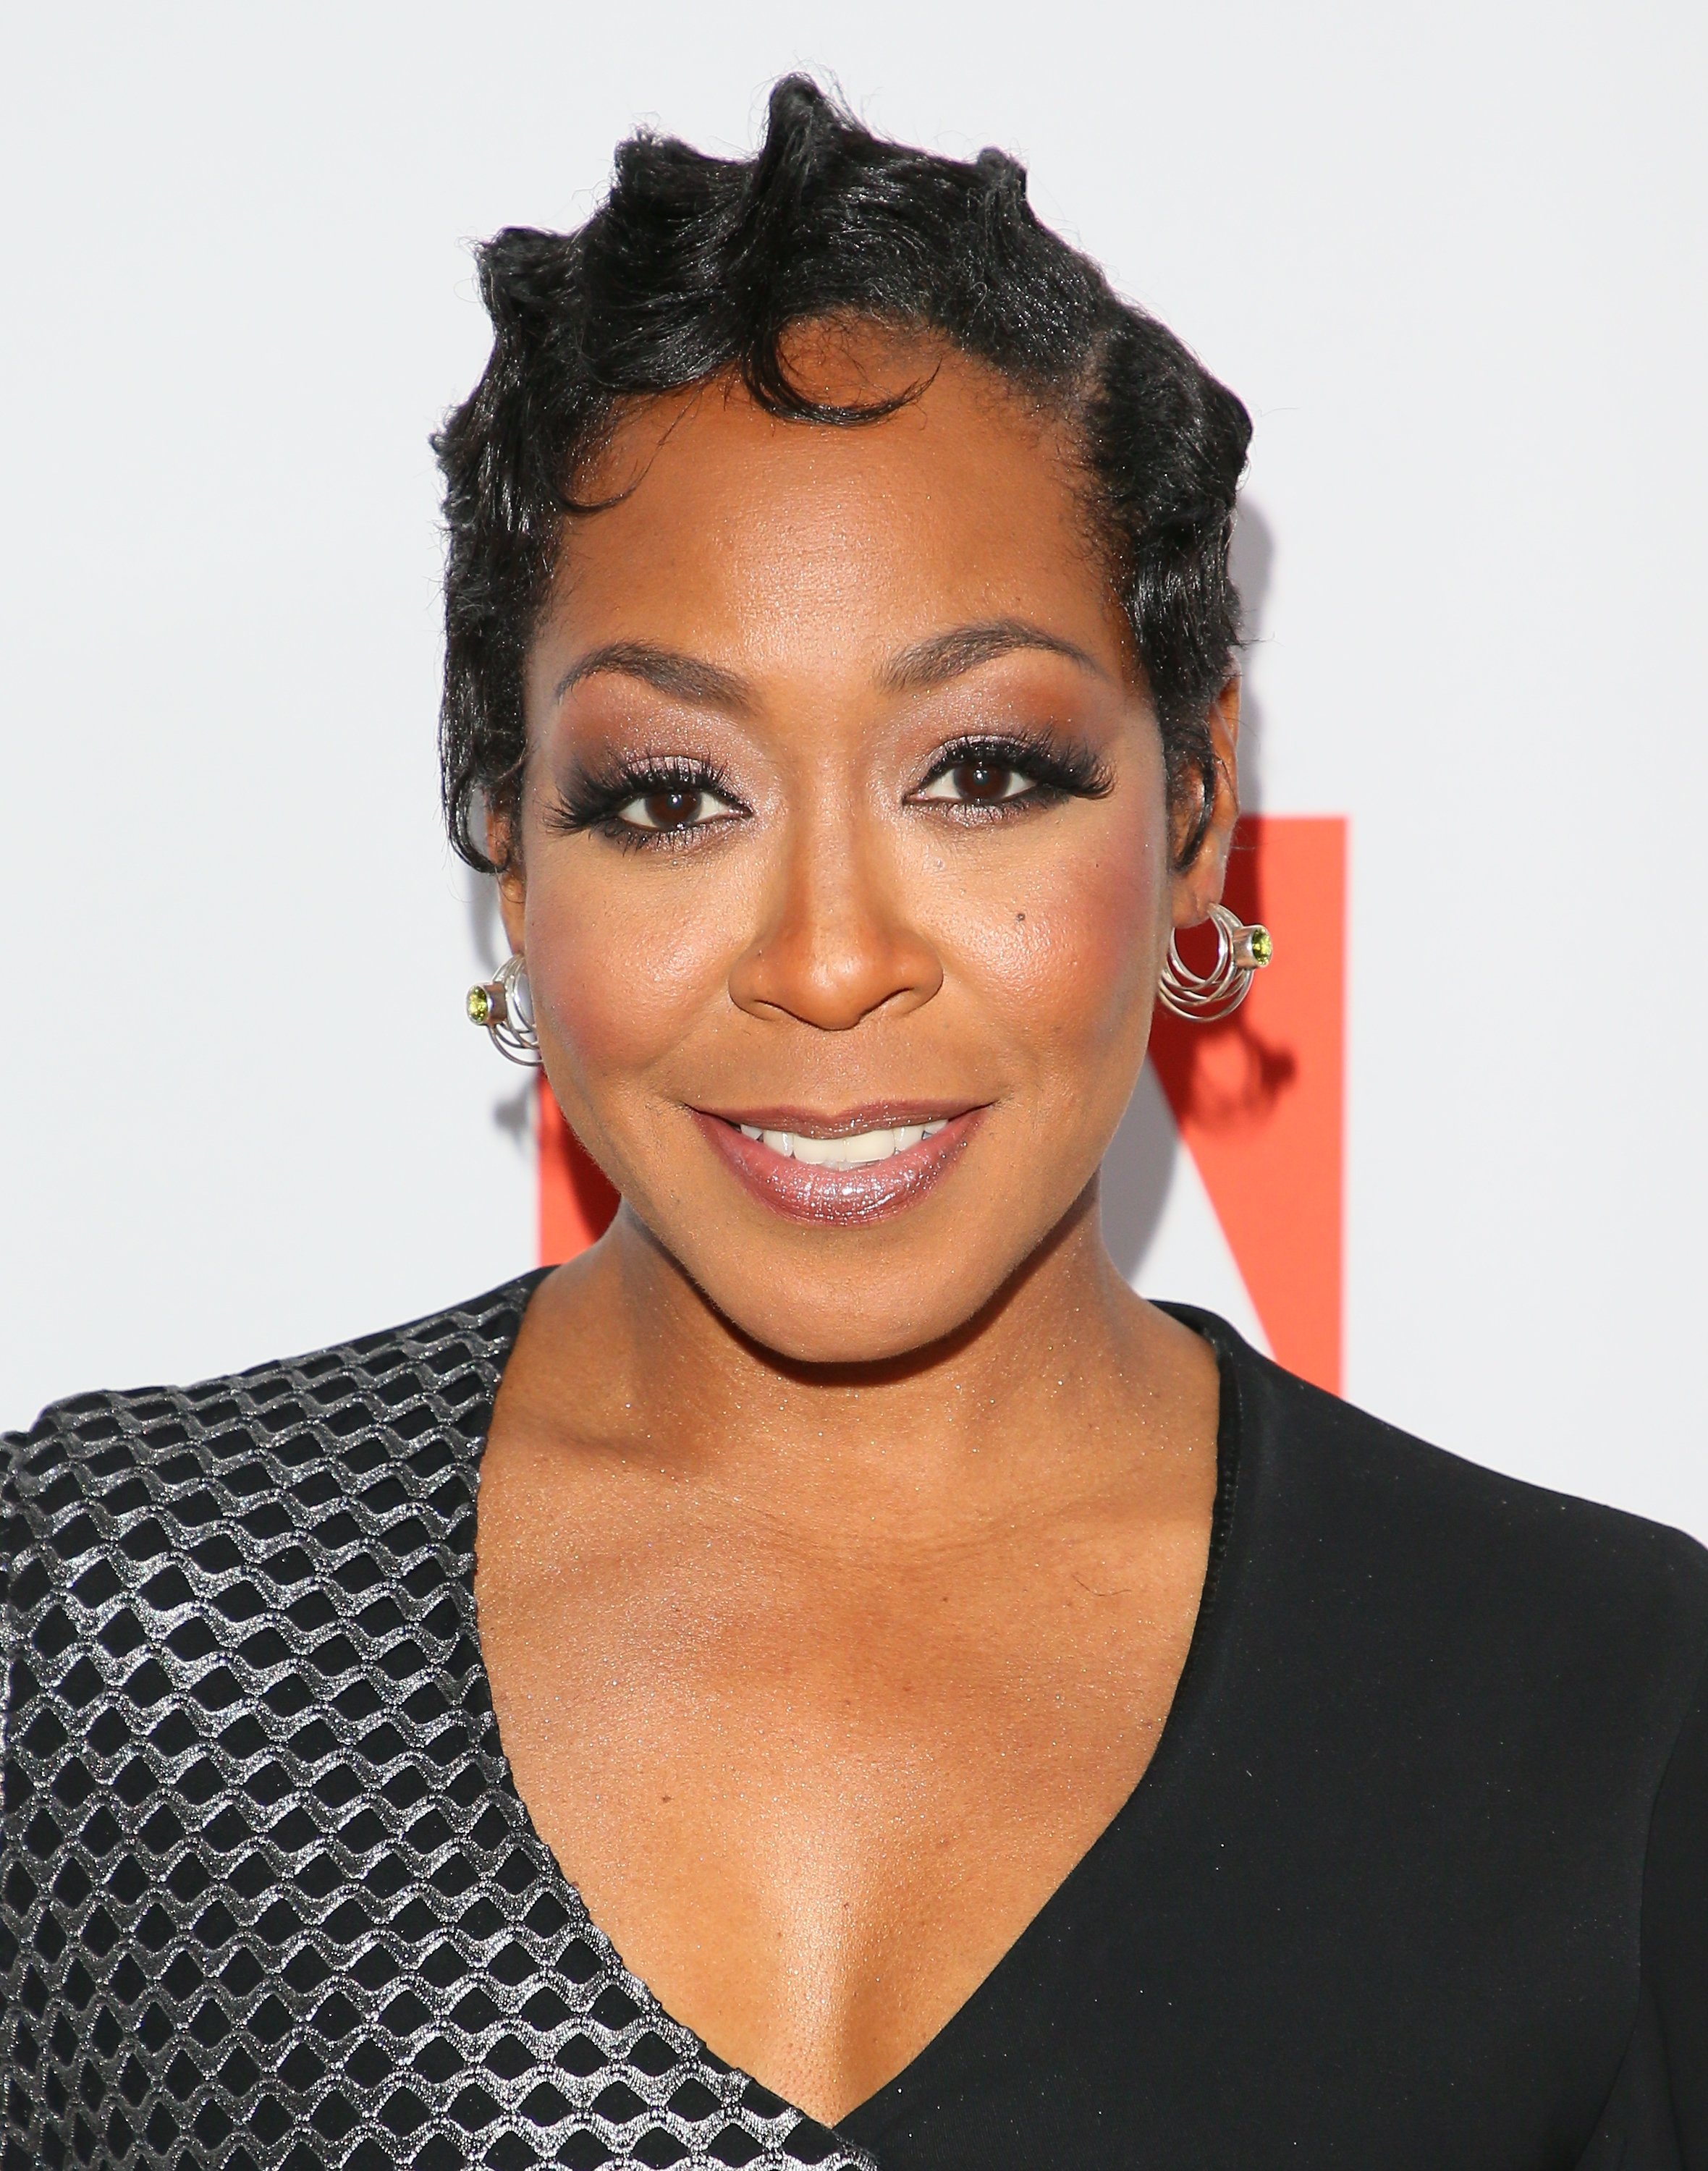 Tichina Arnold attends the 68th Annual ACE Eddie Awards on January 27, 2018 in Beverly Hills, California | Photo: GettyImages